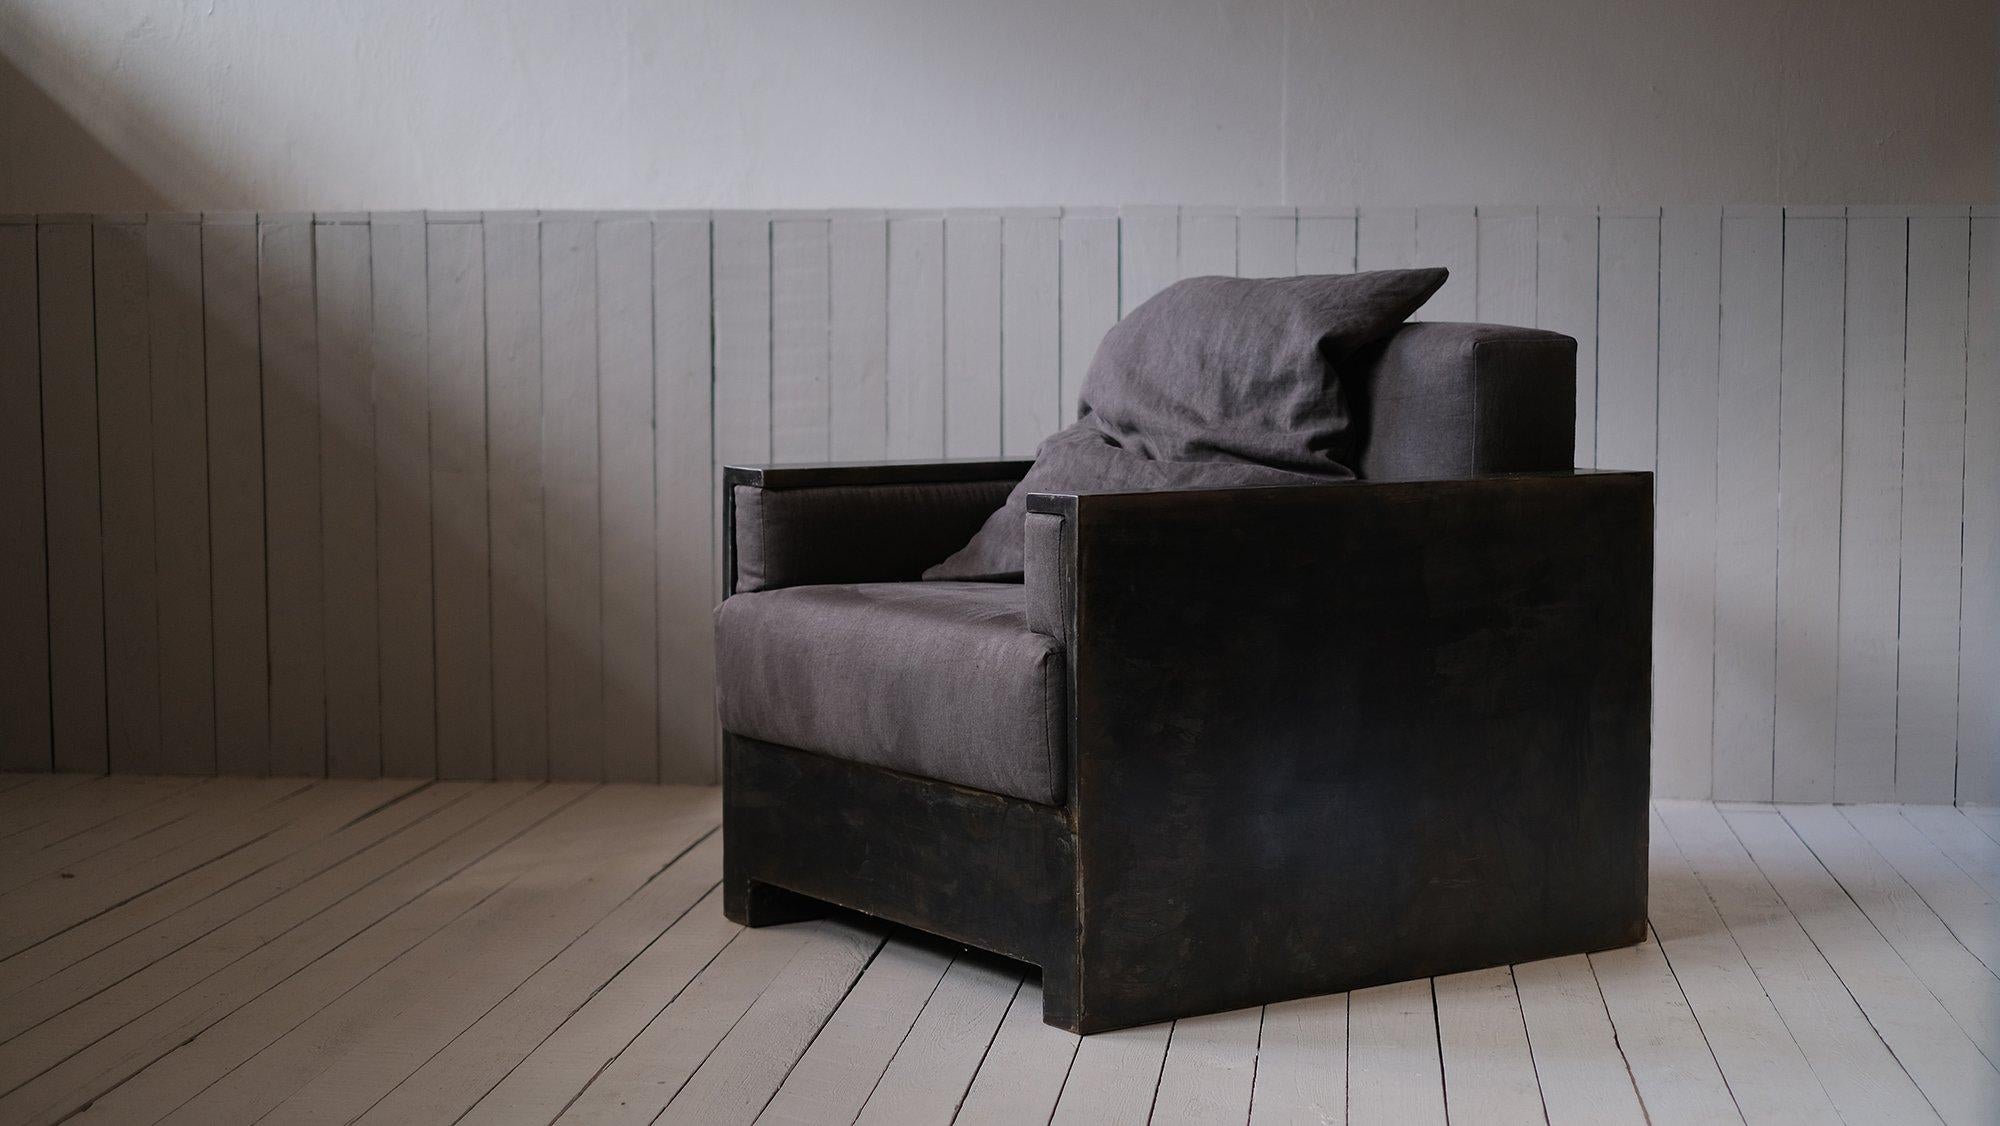 Contemporary armchair in patinated raw steel by Arno Declercq
Limited edition of 8

Dimensions: 
D 80 x W 90 cm x H 80 cm
Material: Patinated and raw steel combined with belgium linen

Made by hand, in Belgium.
Crate included in the